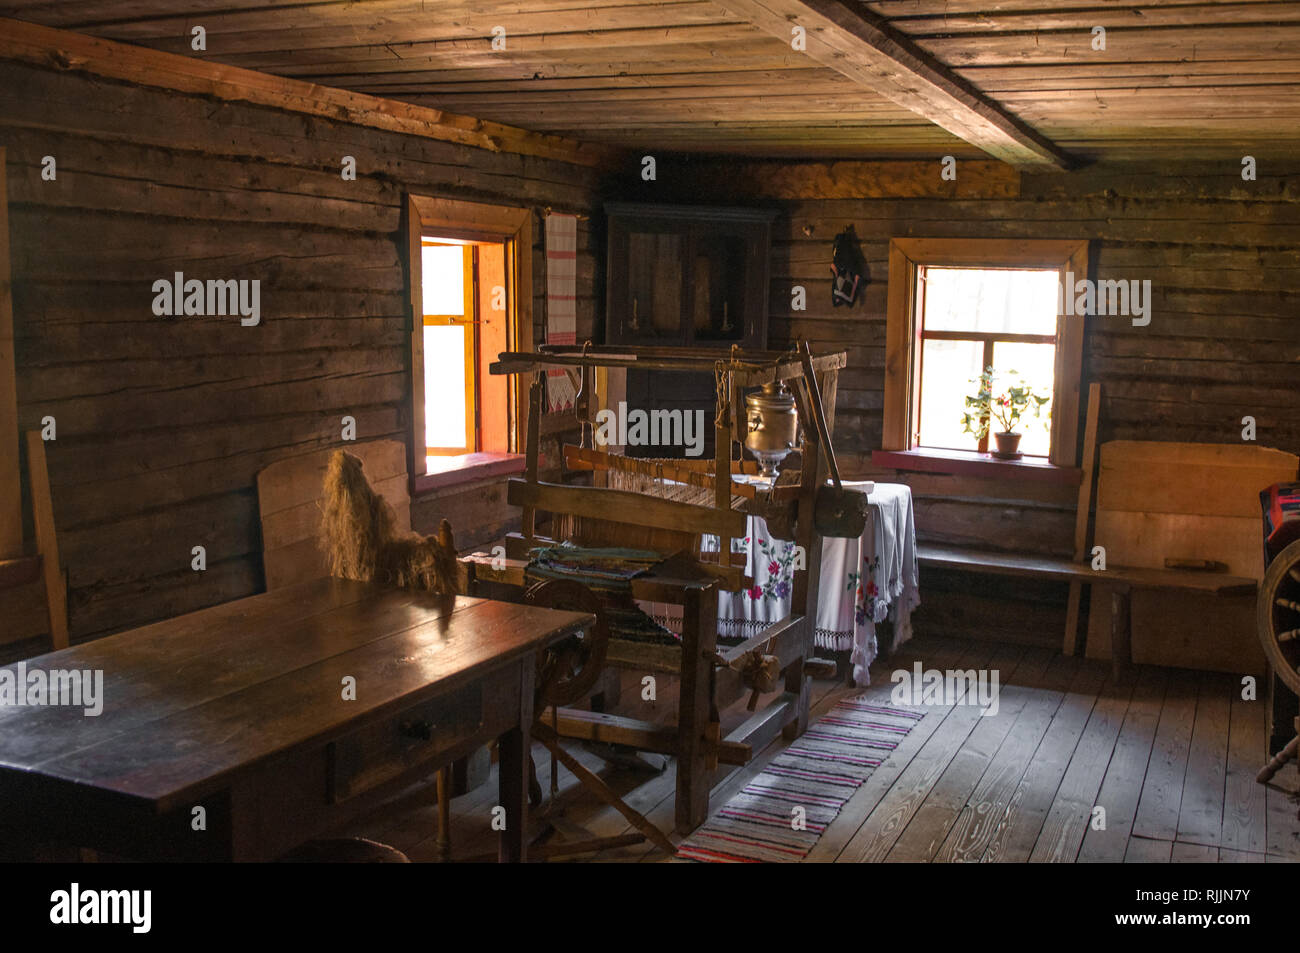 The interior of an old rural house. Stock Photo